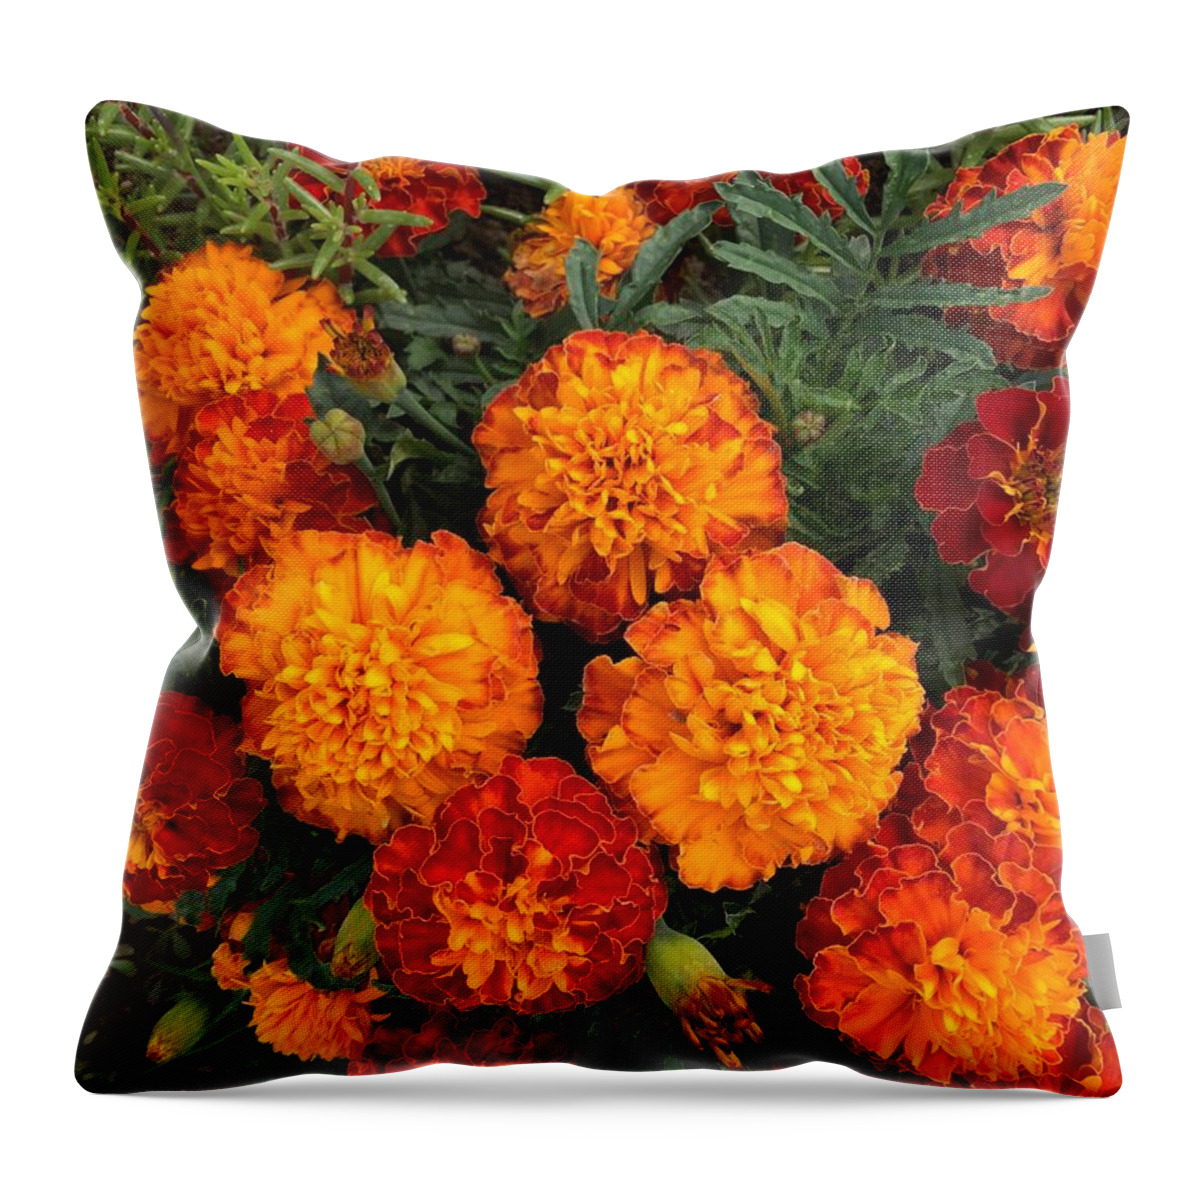 Marigold Throw Pillow featuring the photograph Marigold Fire by Sharon Duguay